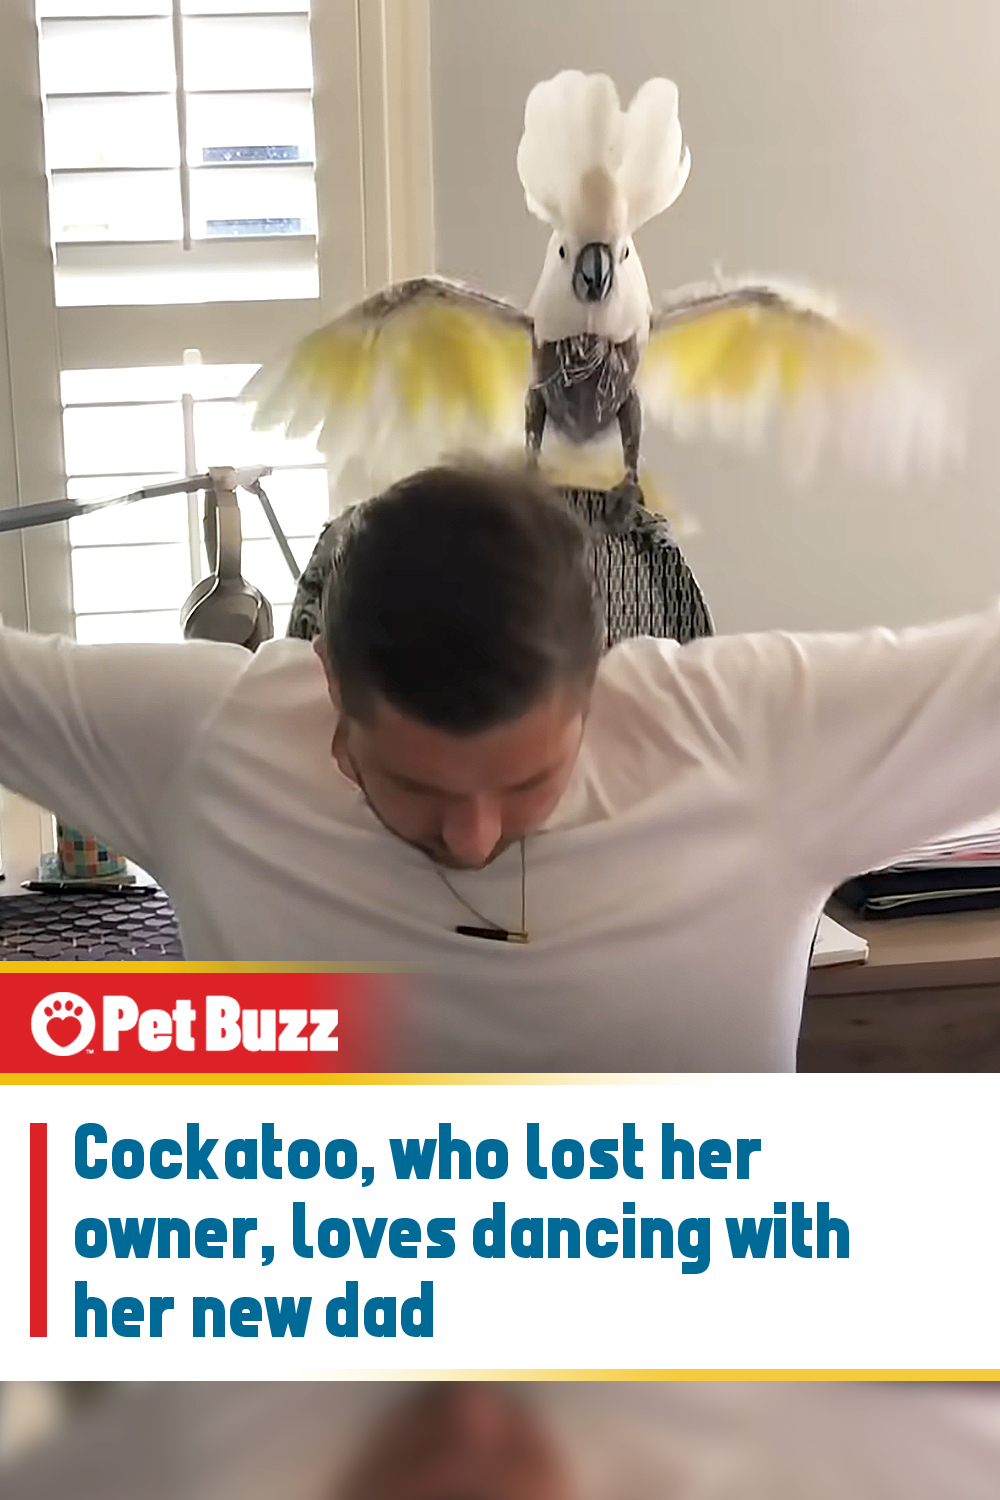 Cockatoo, who lost her owner, loves dancing with her new dad